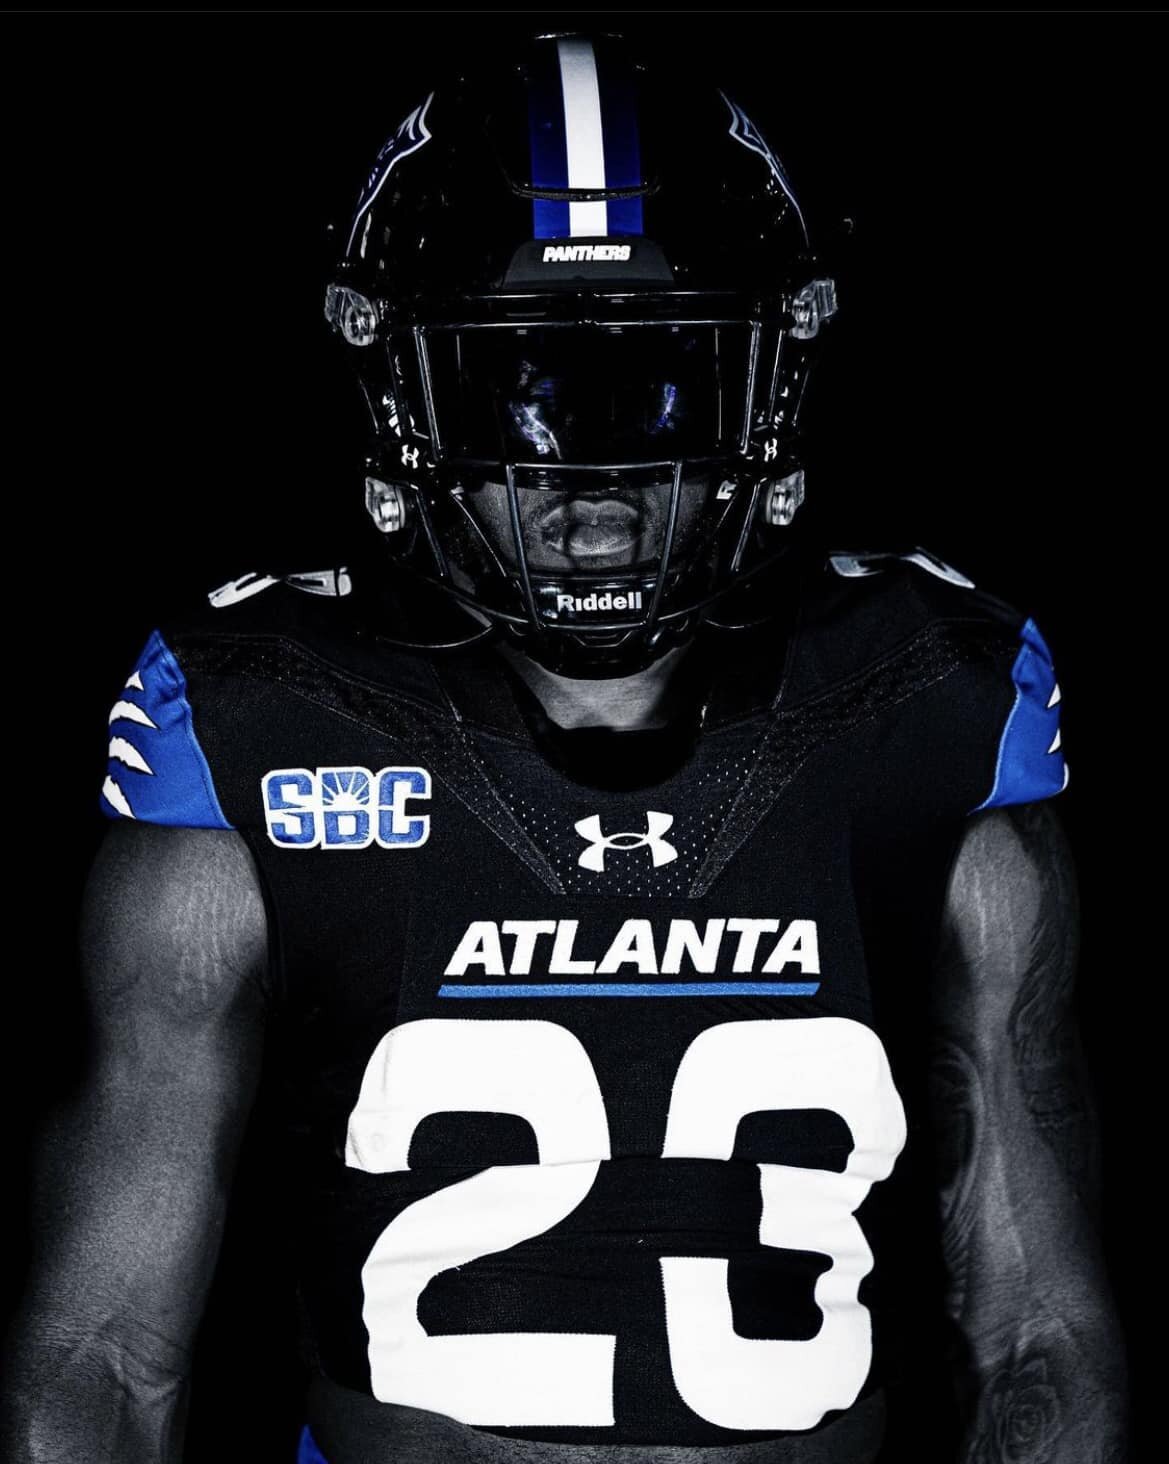 Y&rsquo;all seen my schools newest jerseys?! Hardest in college football if you ask me! #BleedBlue #PantherFamily @gsu_football